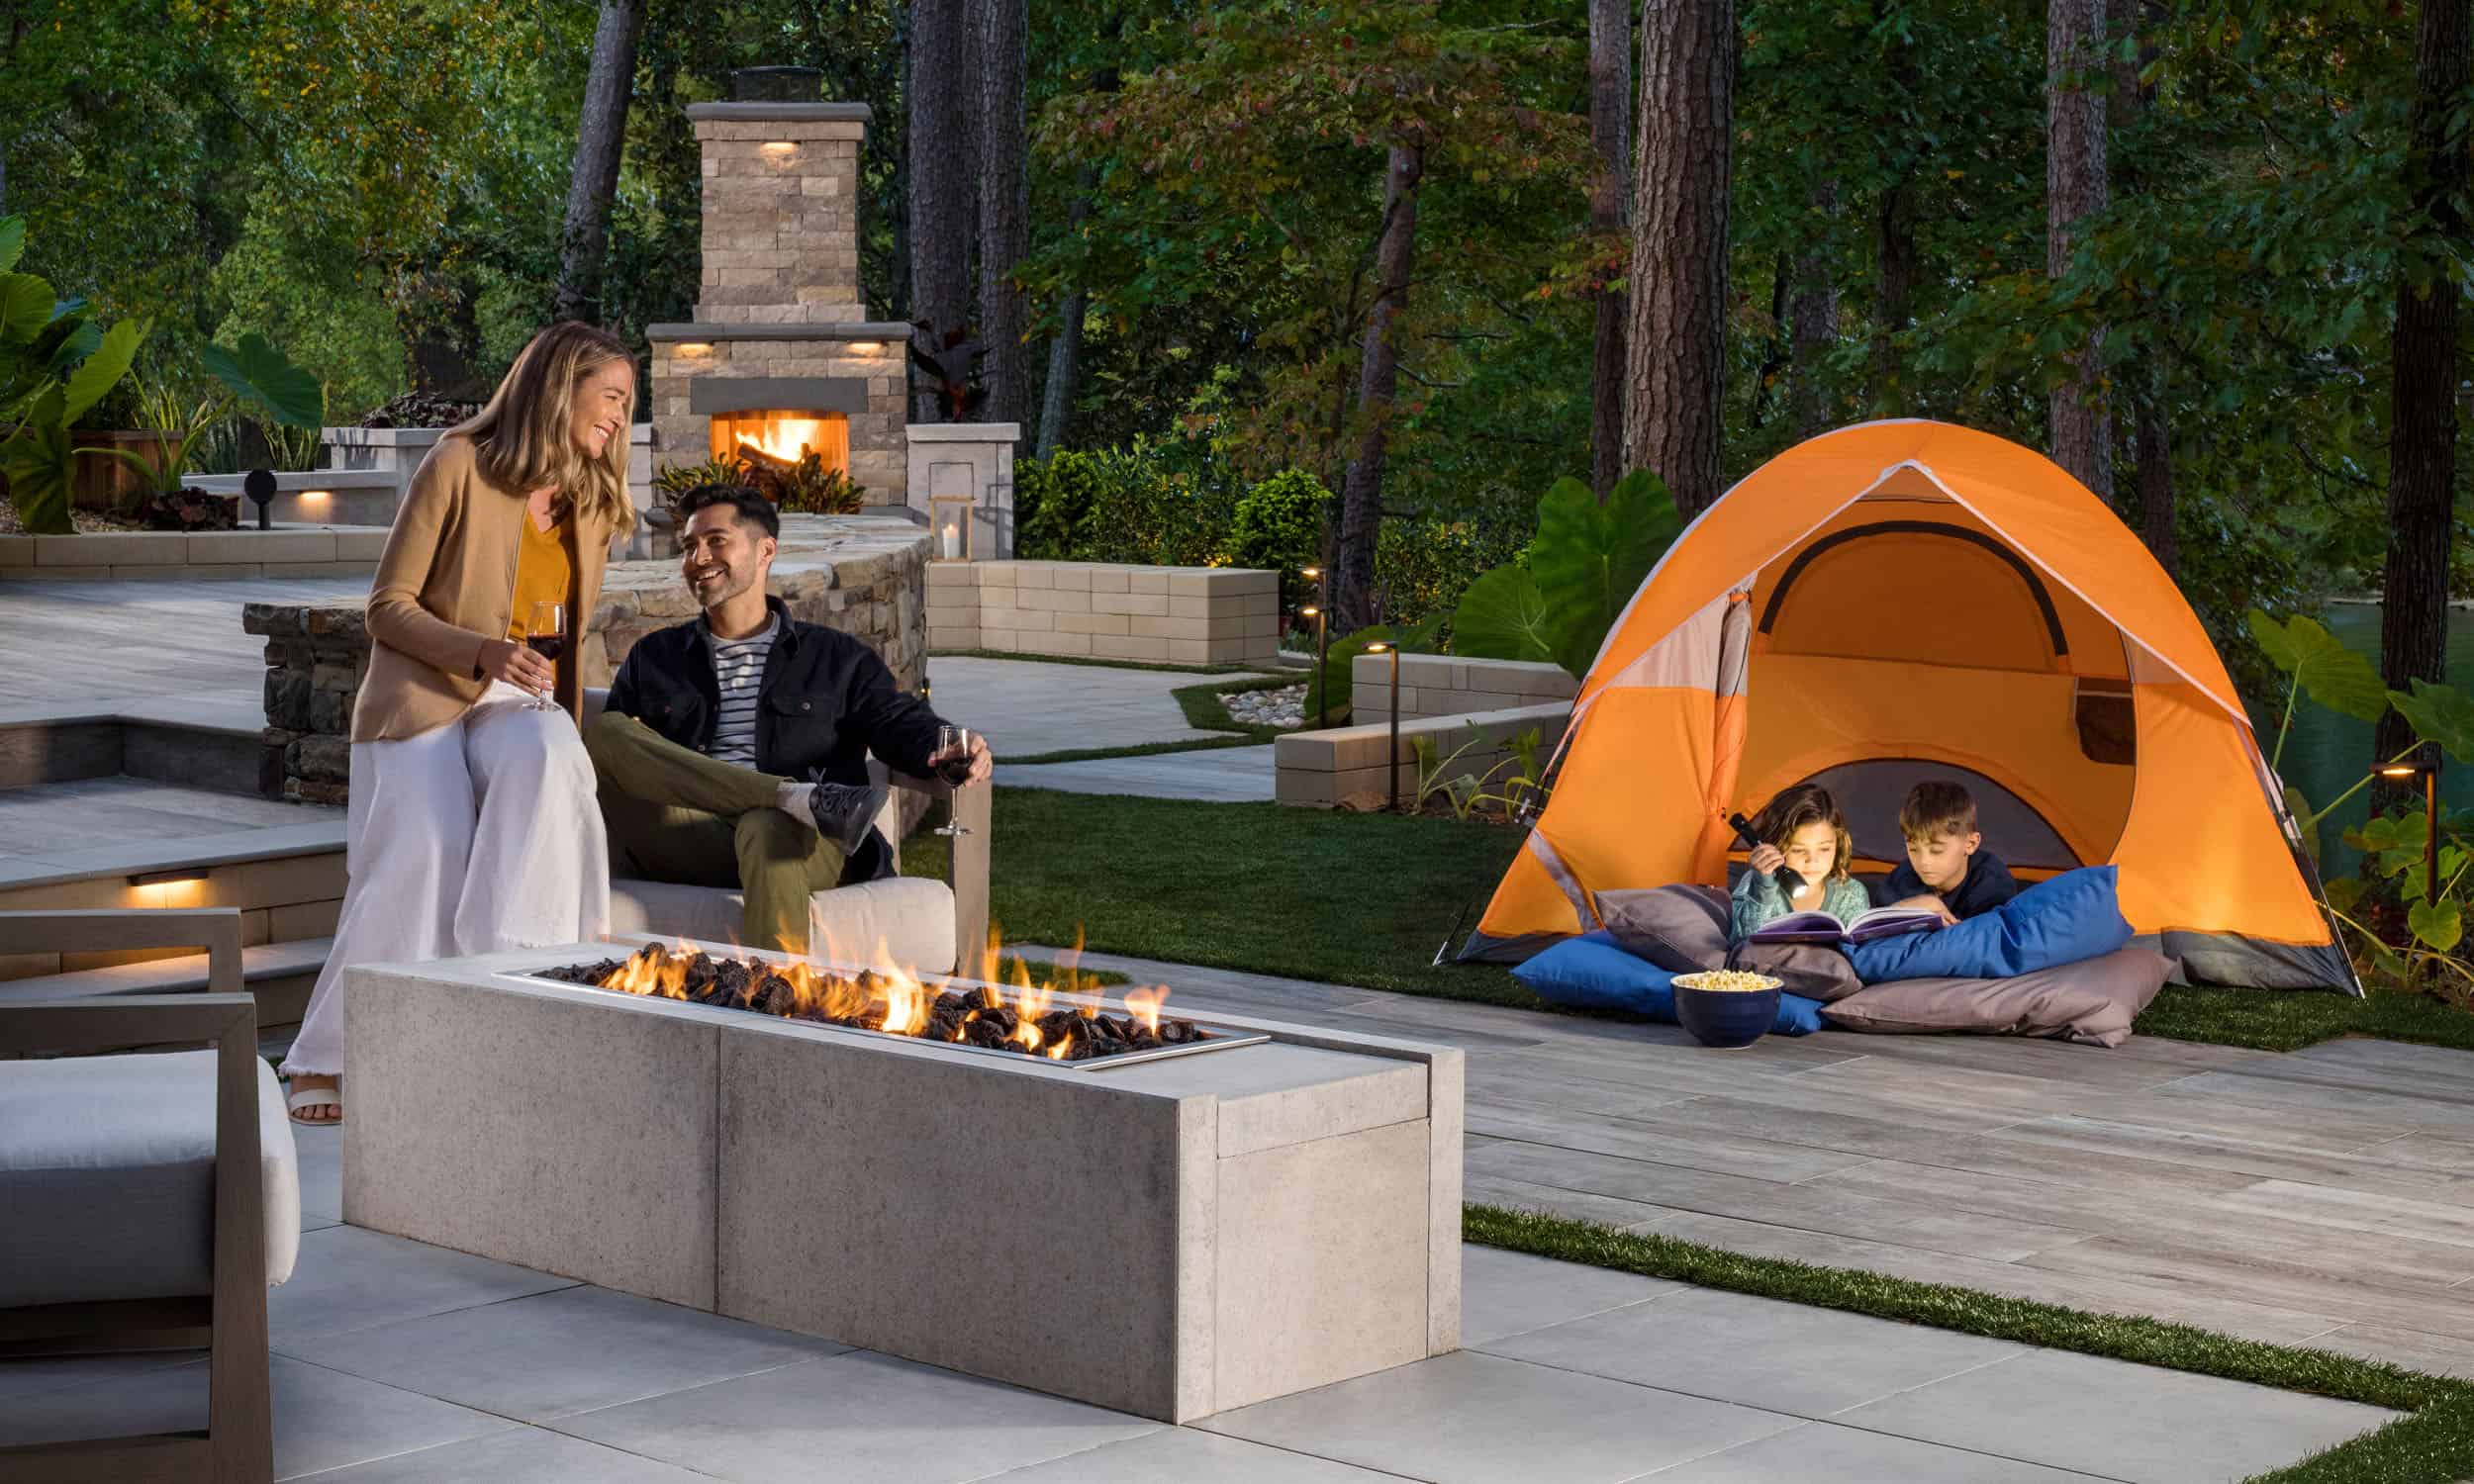 A family enjoying their outdoor space while kids play in a tent